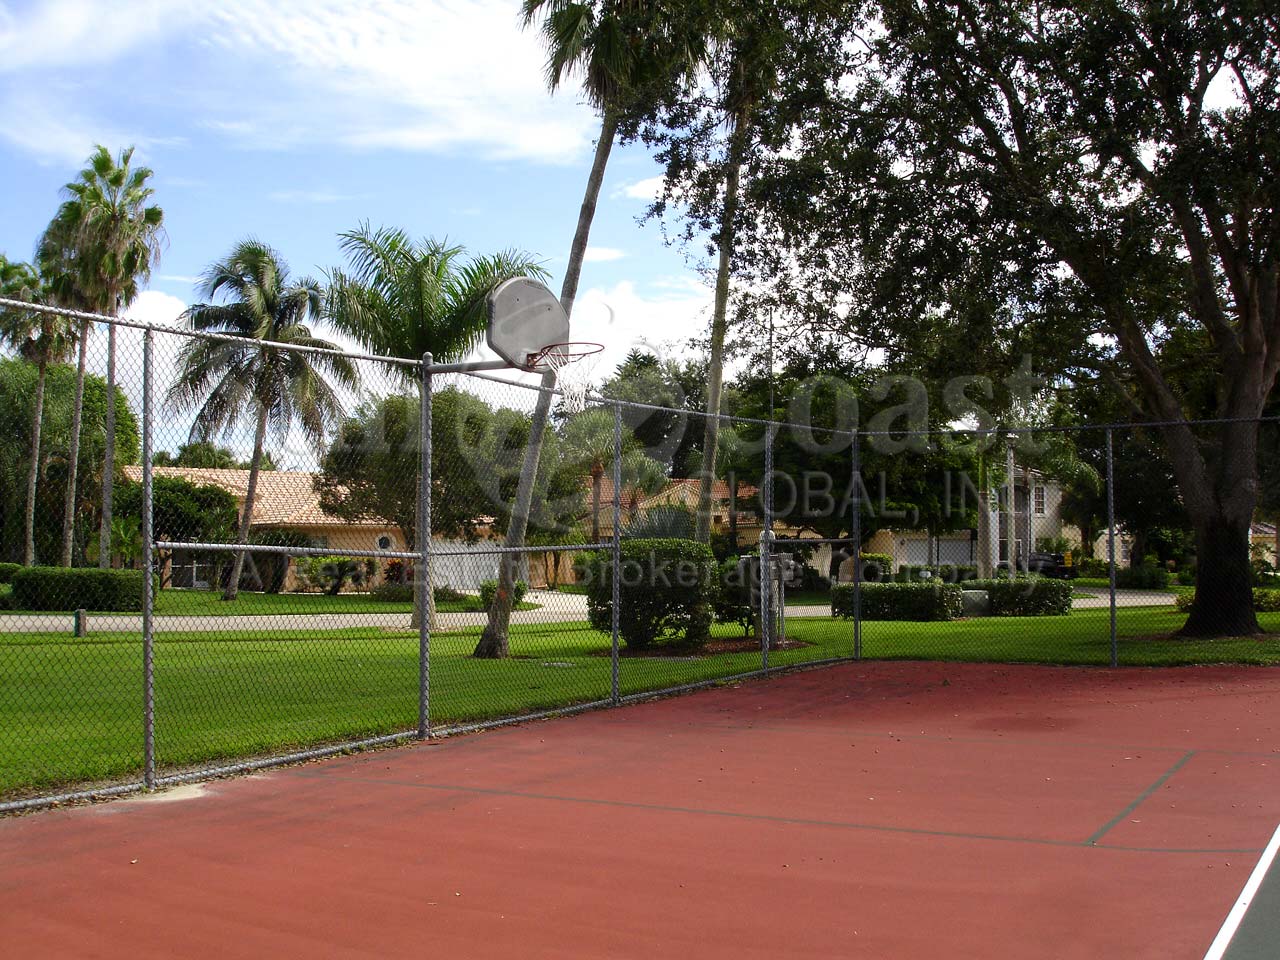 EMERALD LAKES Basketball Courts